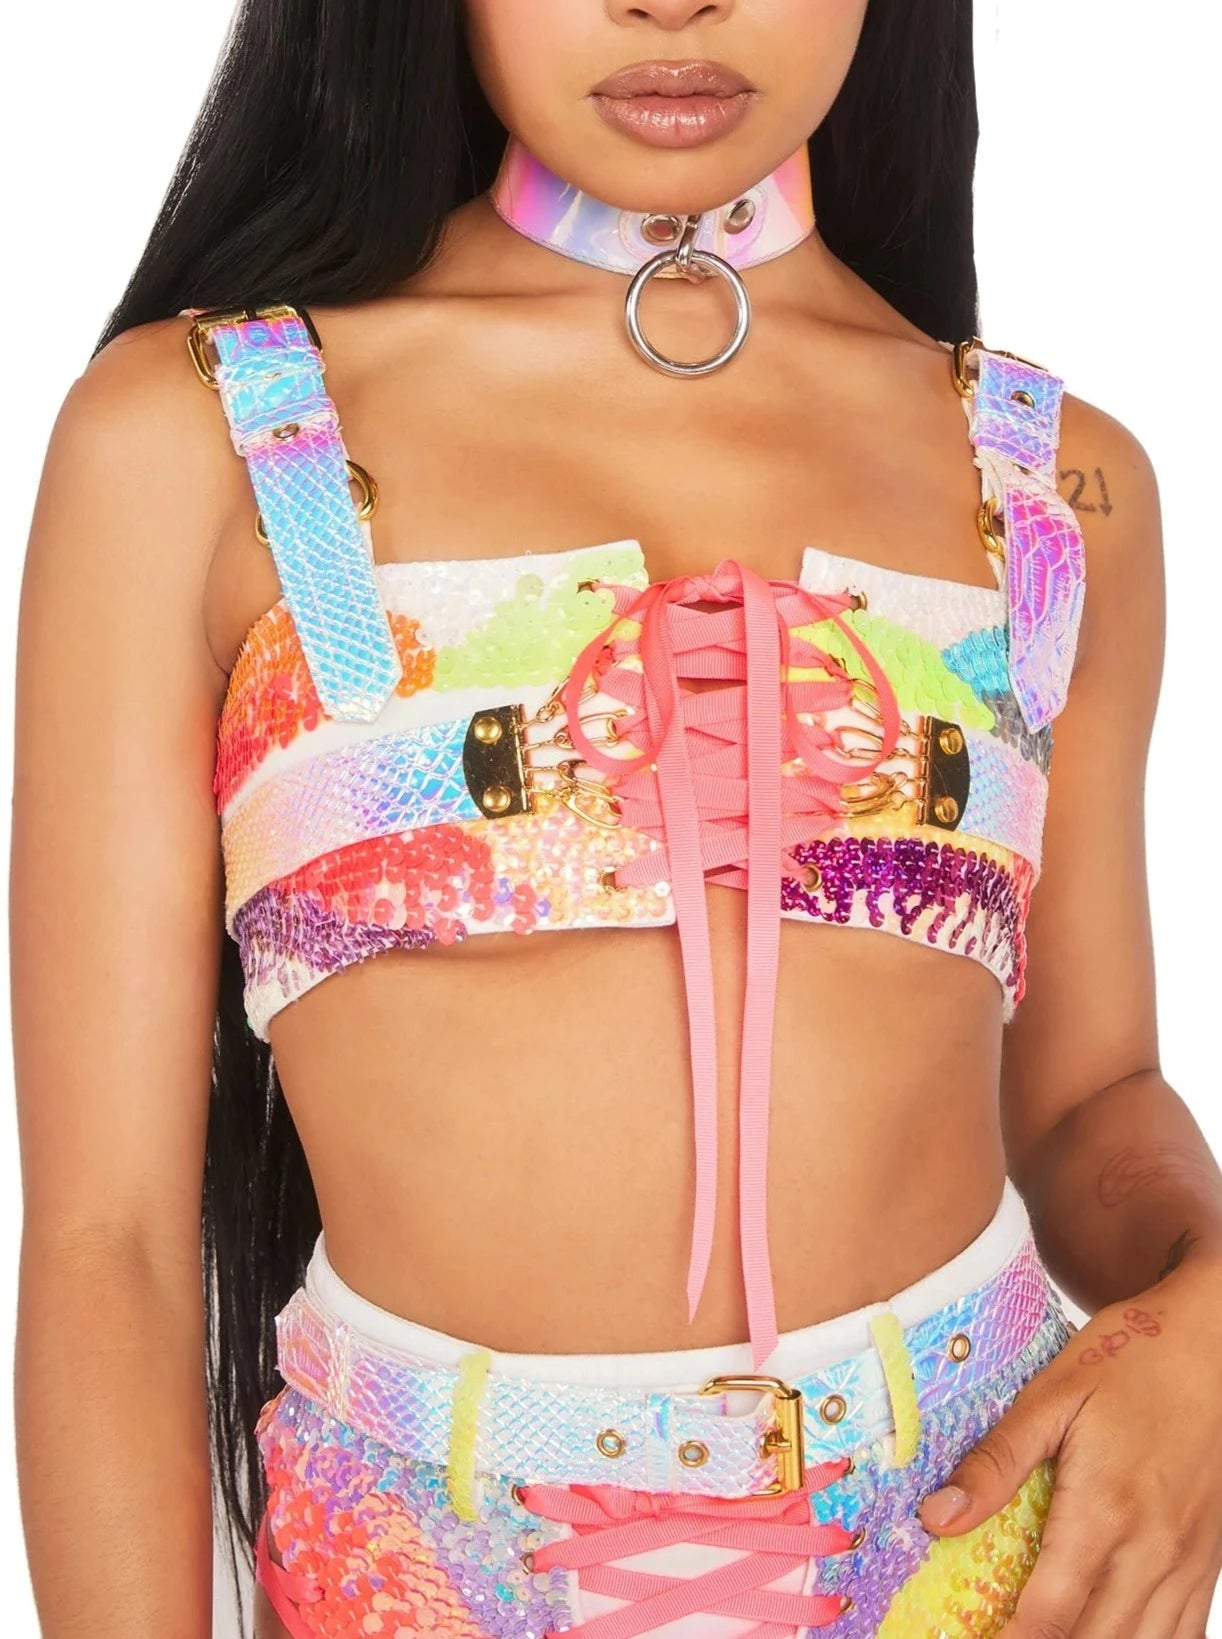 Kidd Cassidy's Electric Lasso Top